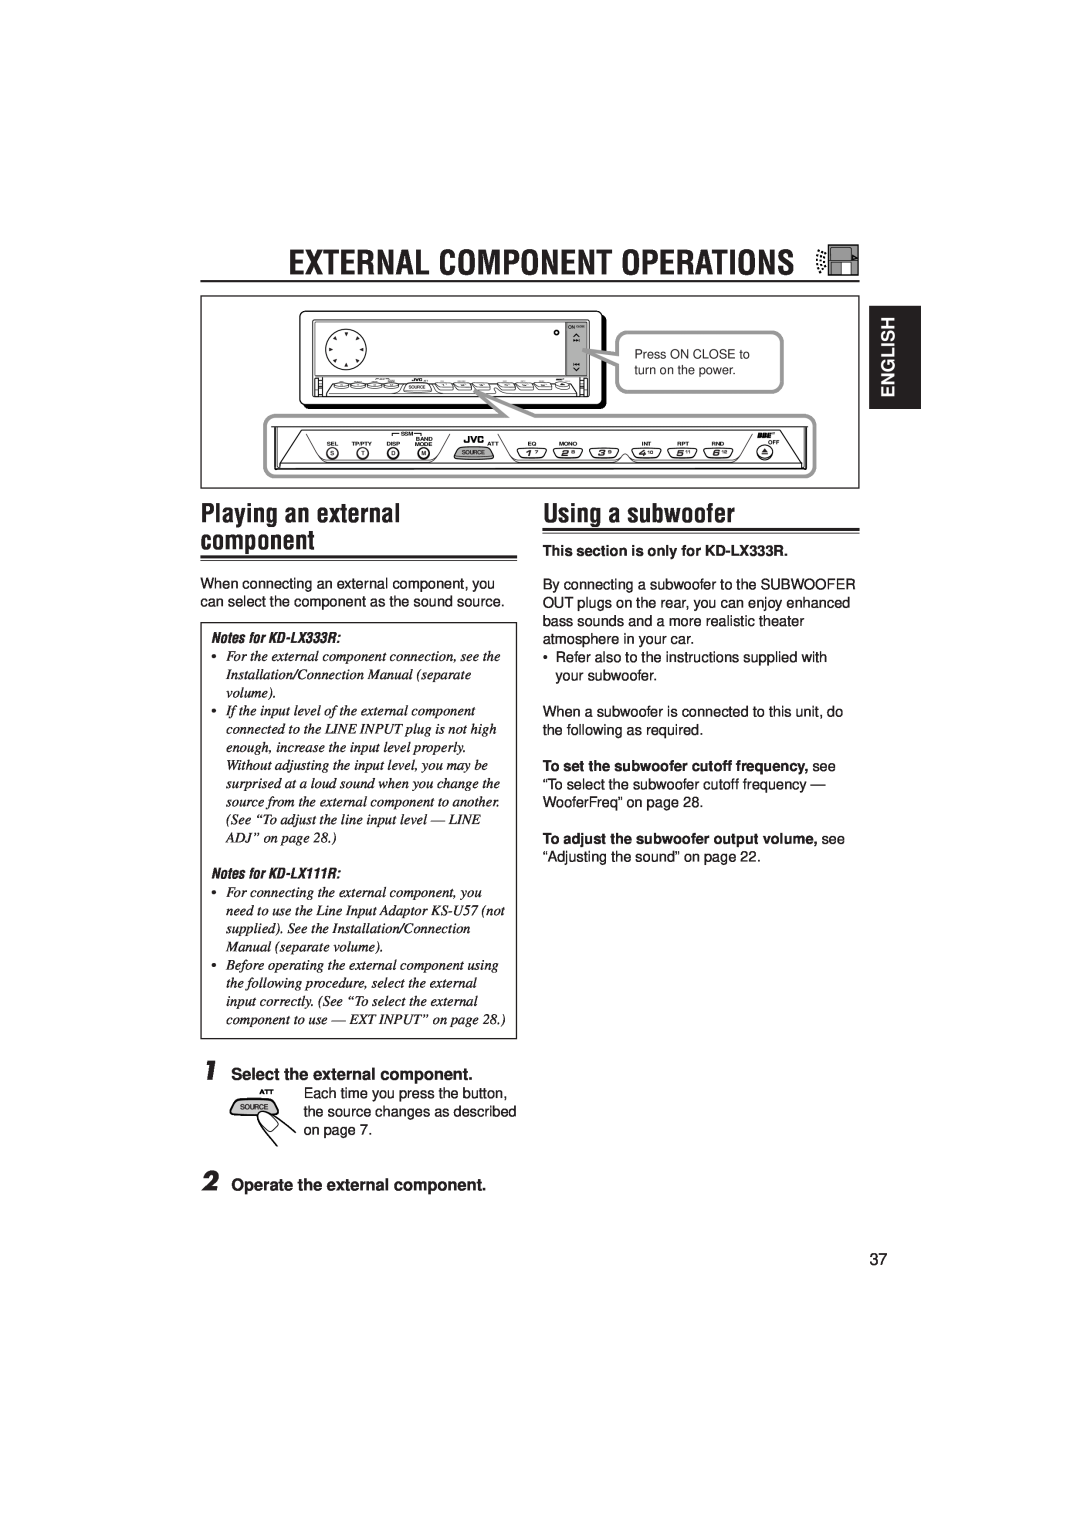 JVC PIM171200 manual Using a subwoofer, Playing an external component, External Component Operations, English 